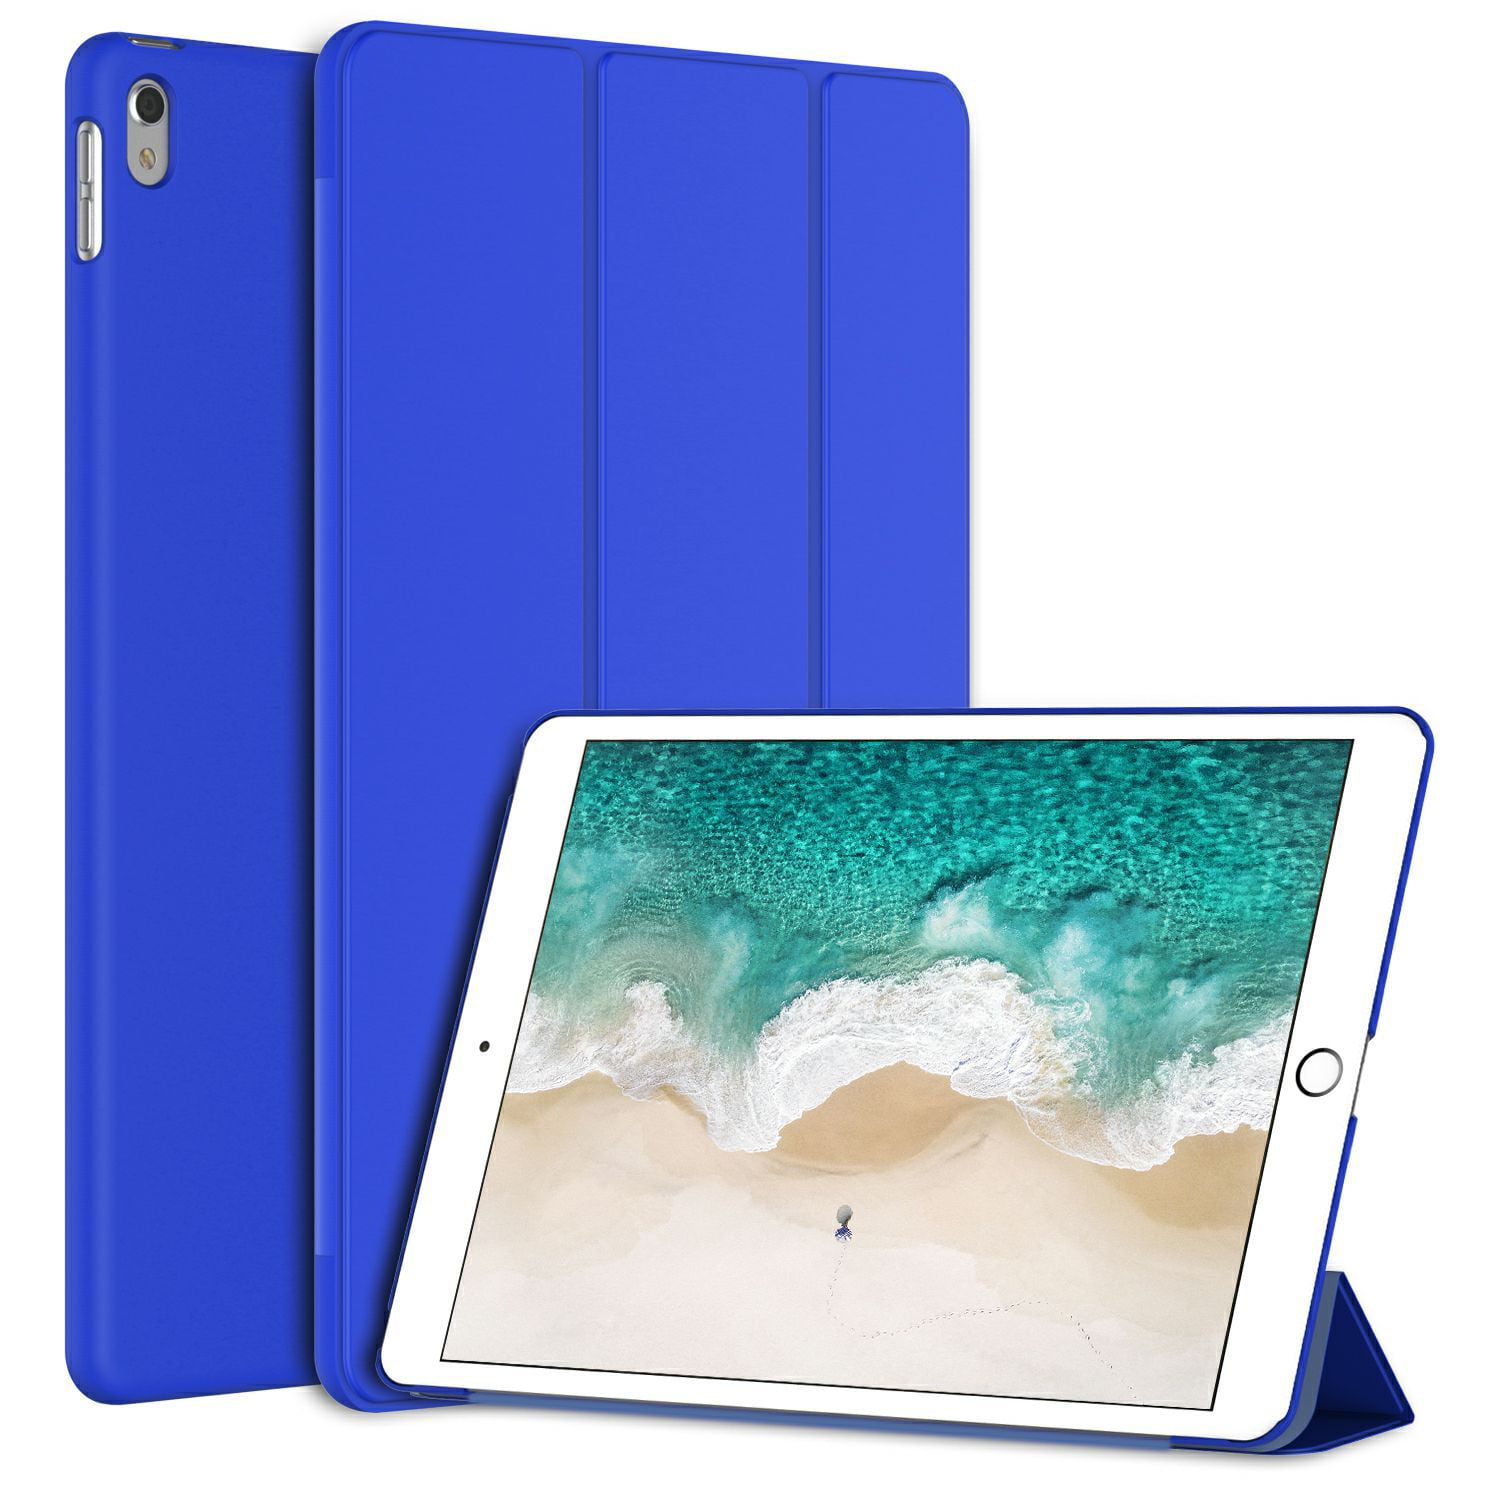 iPad Pro 10.5 Case, JETech Case Cover for the New Apple iPad Pro 10.5